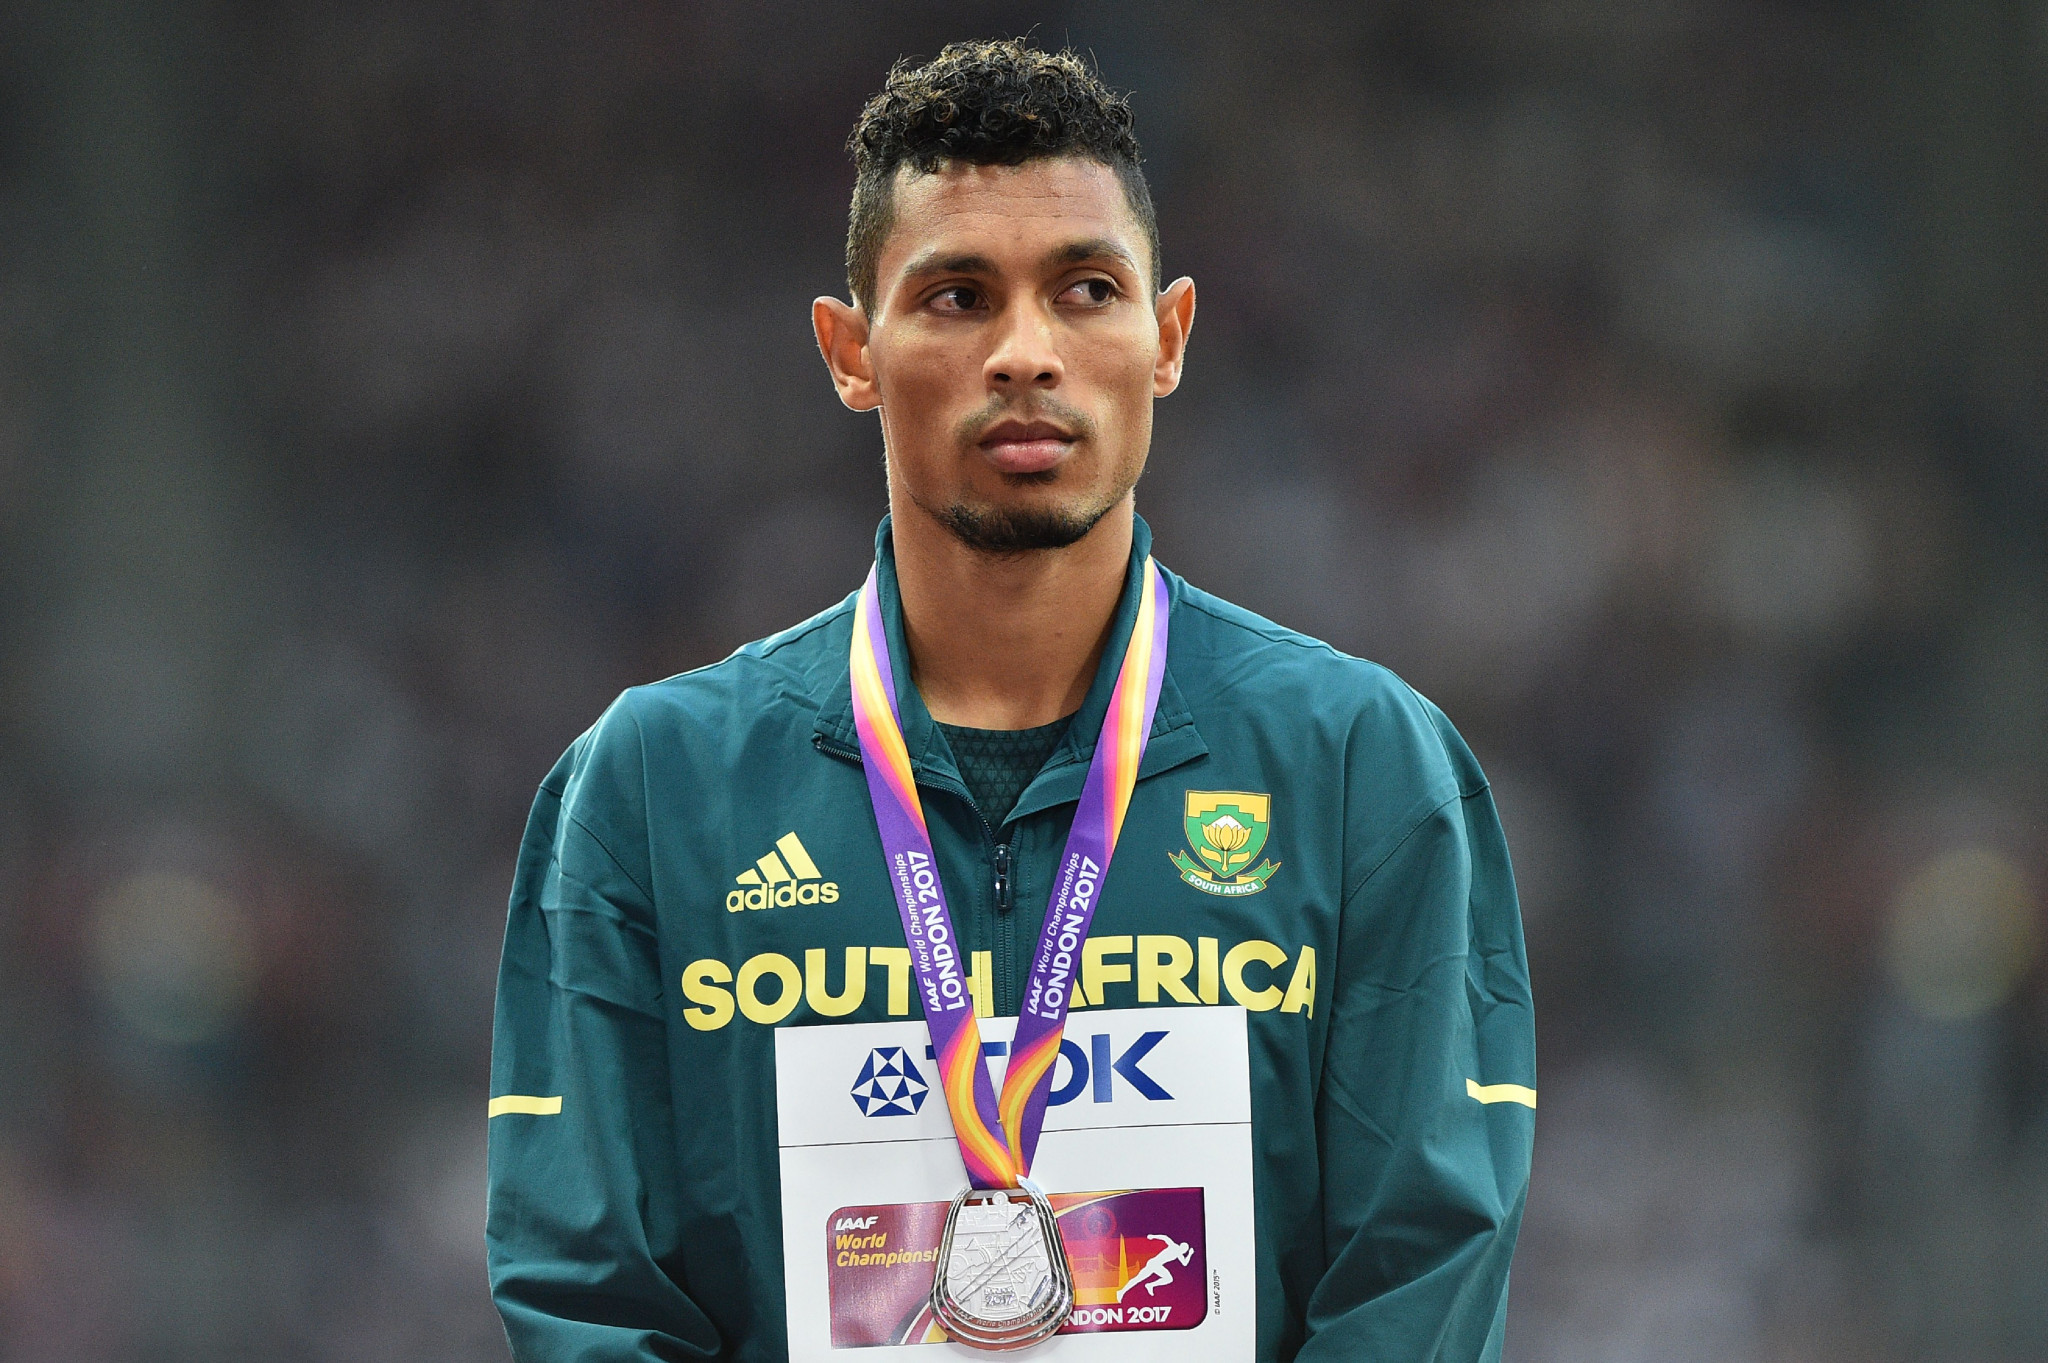 South Africa's Wayde van Niekerk, renowned for his speed in sprinting, is also on the line-up for the Male Athlete of the Year award ©Getty Images